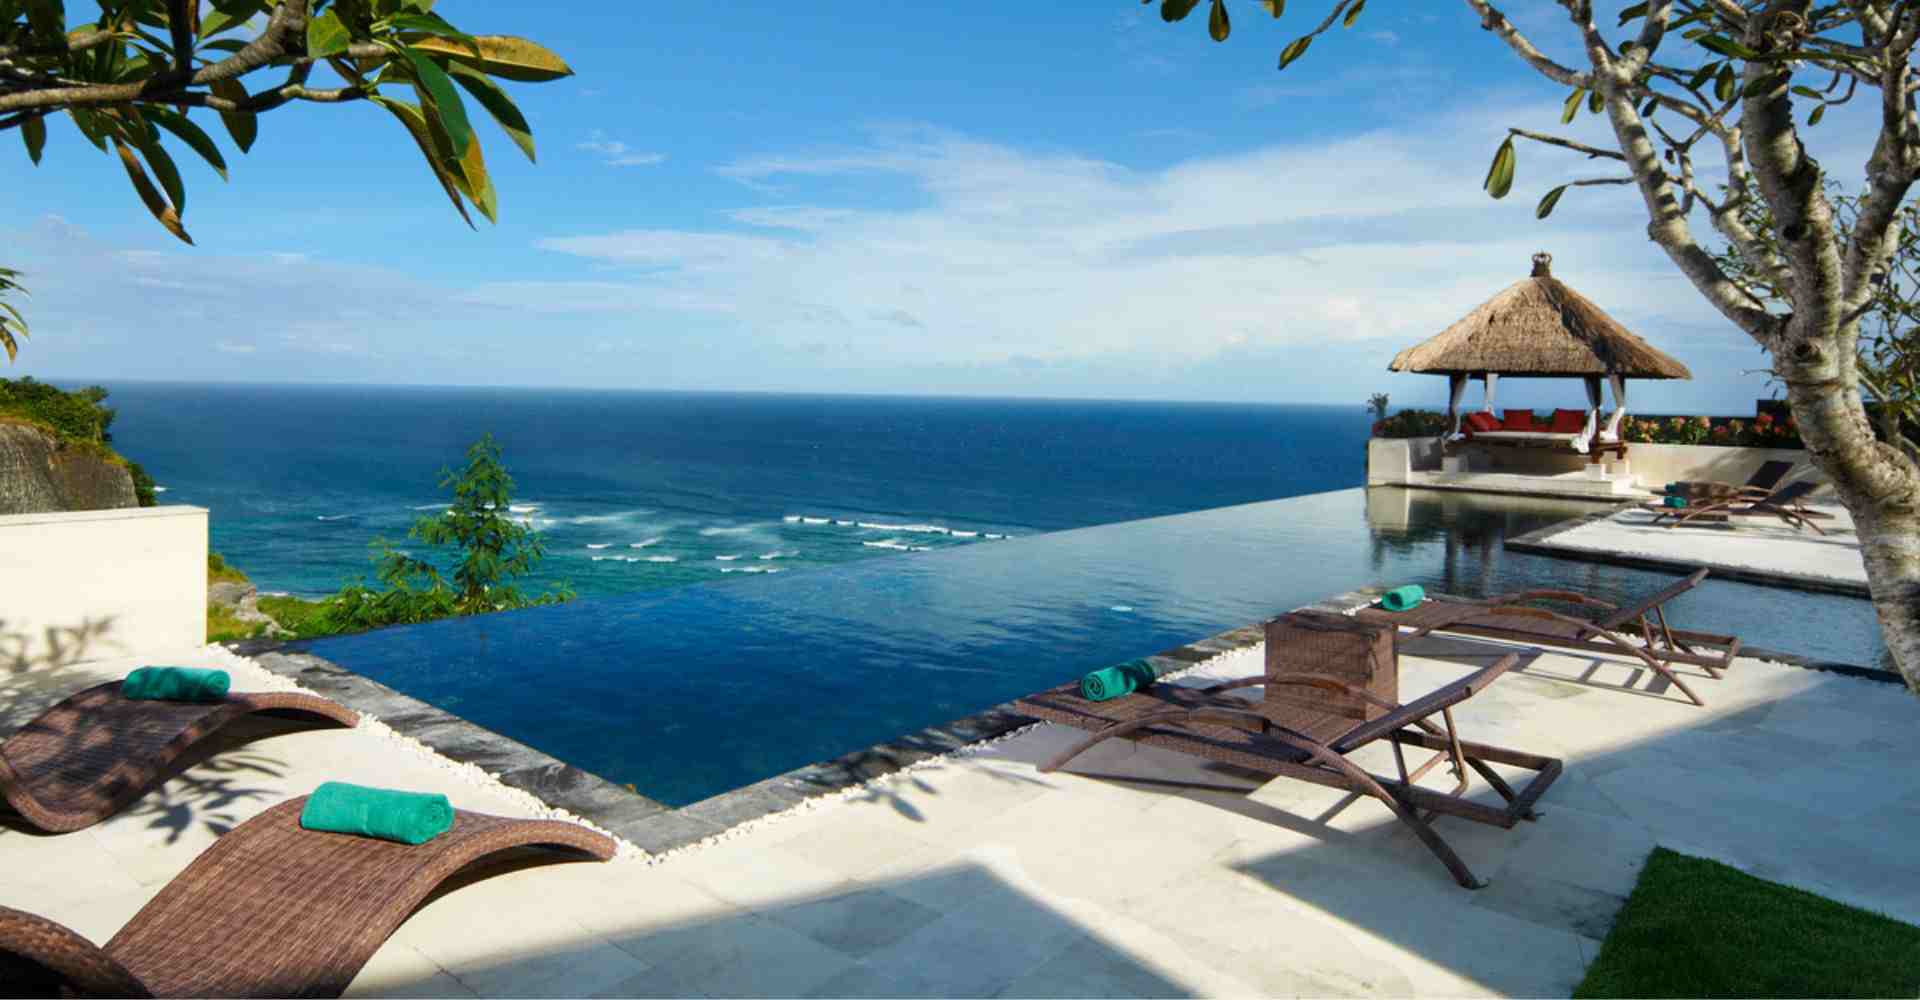 Exclusive Bali Honeymoon | FREE UPGRADE in A Private Pool Villa 5N / 6D